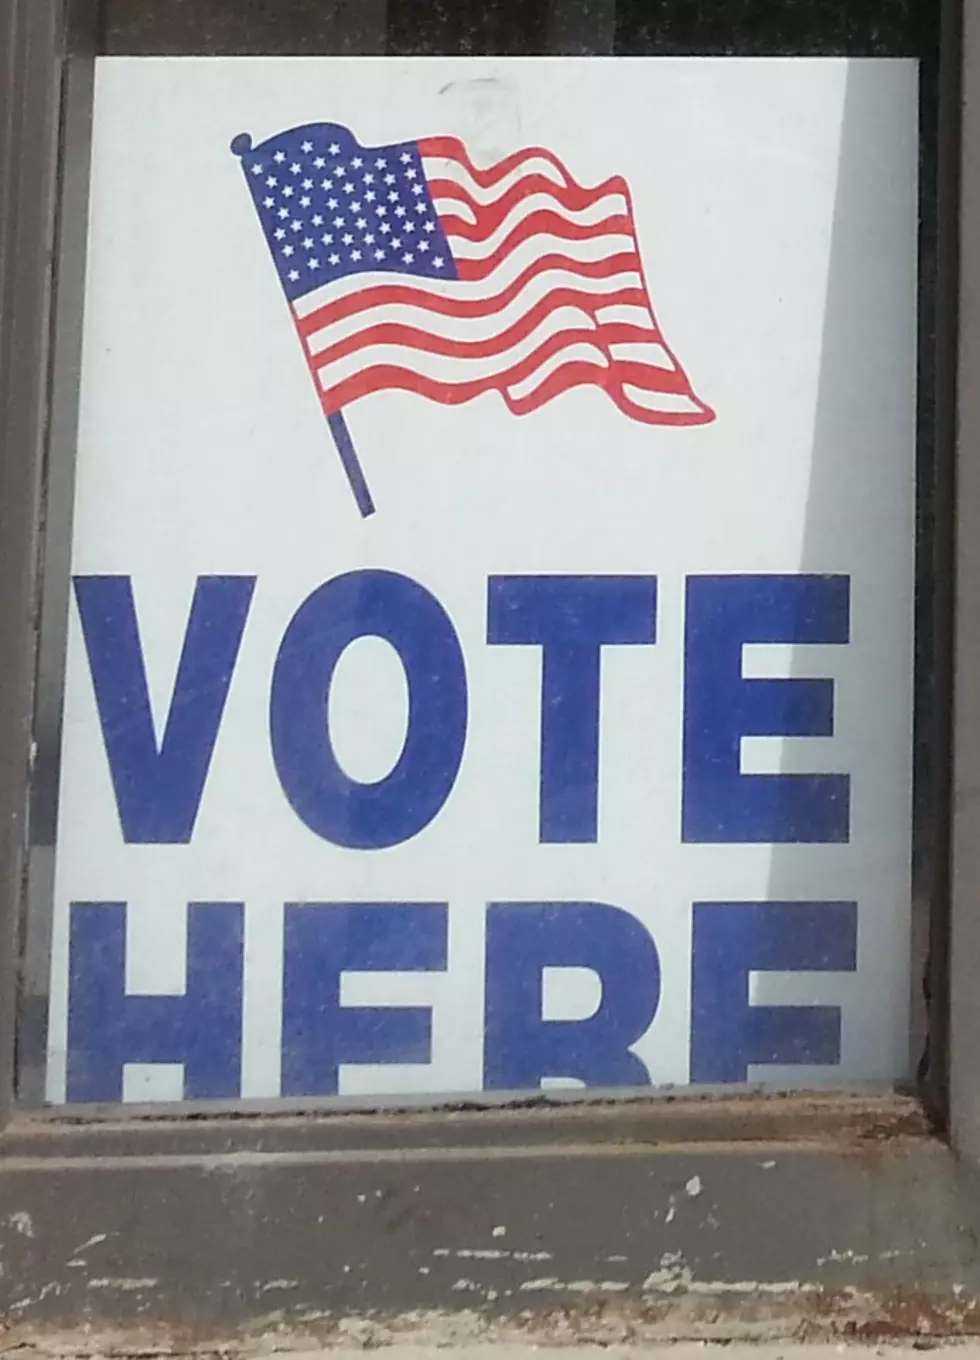 Primary Deadlines for Broome County Voters